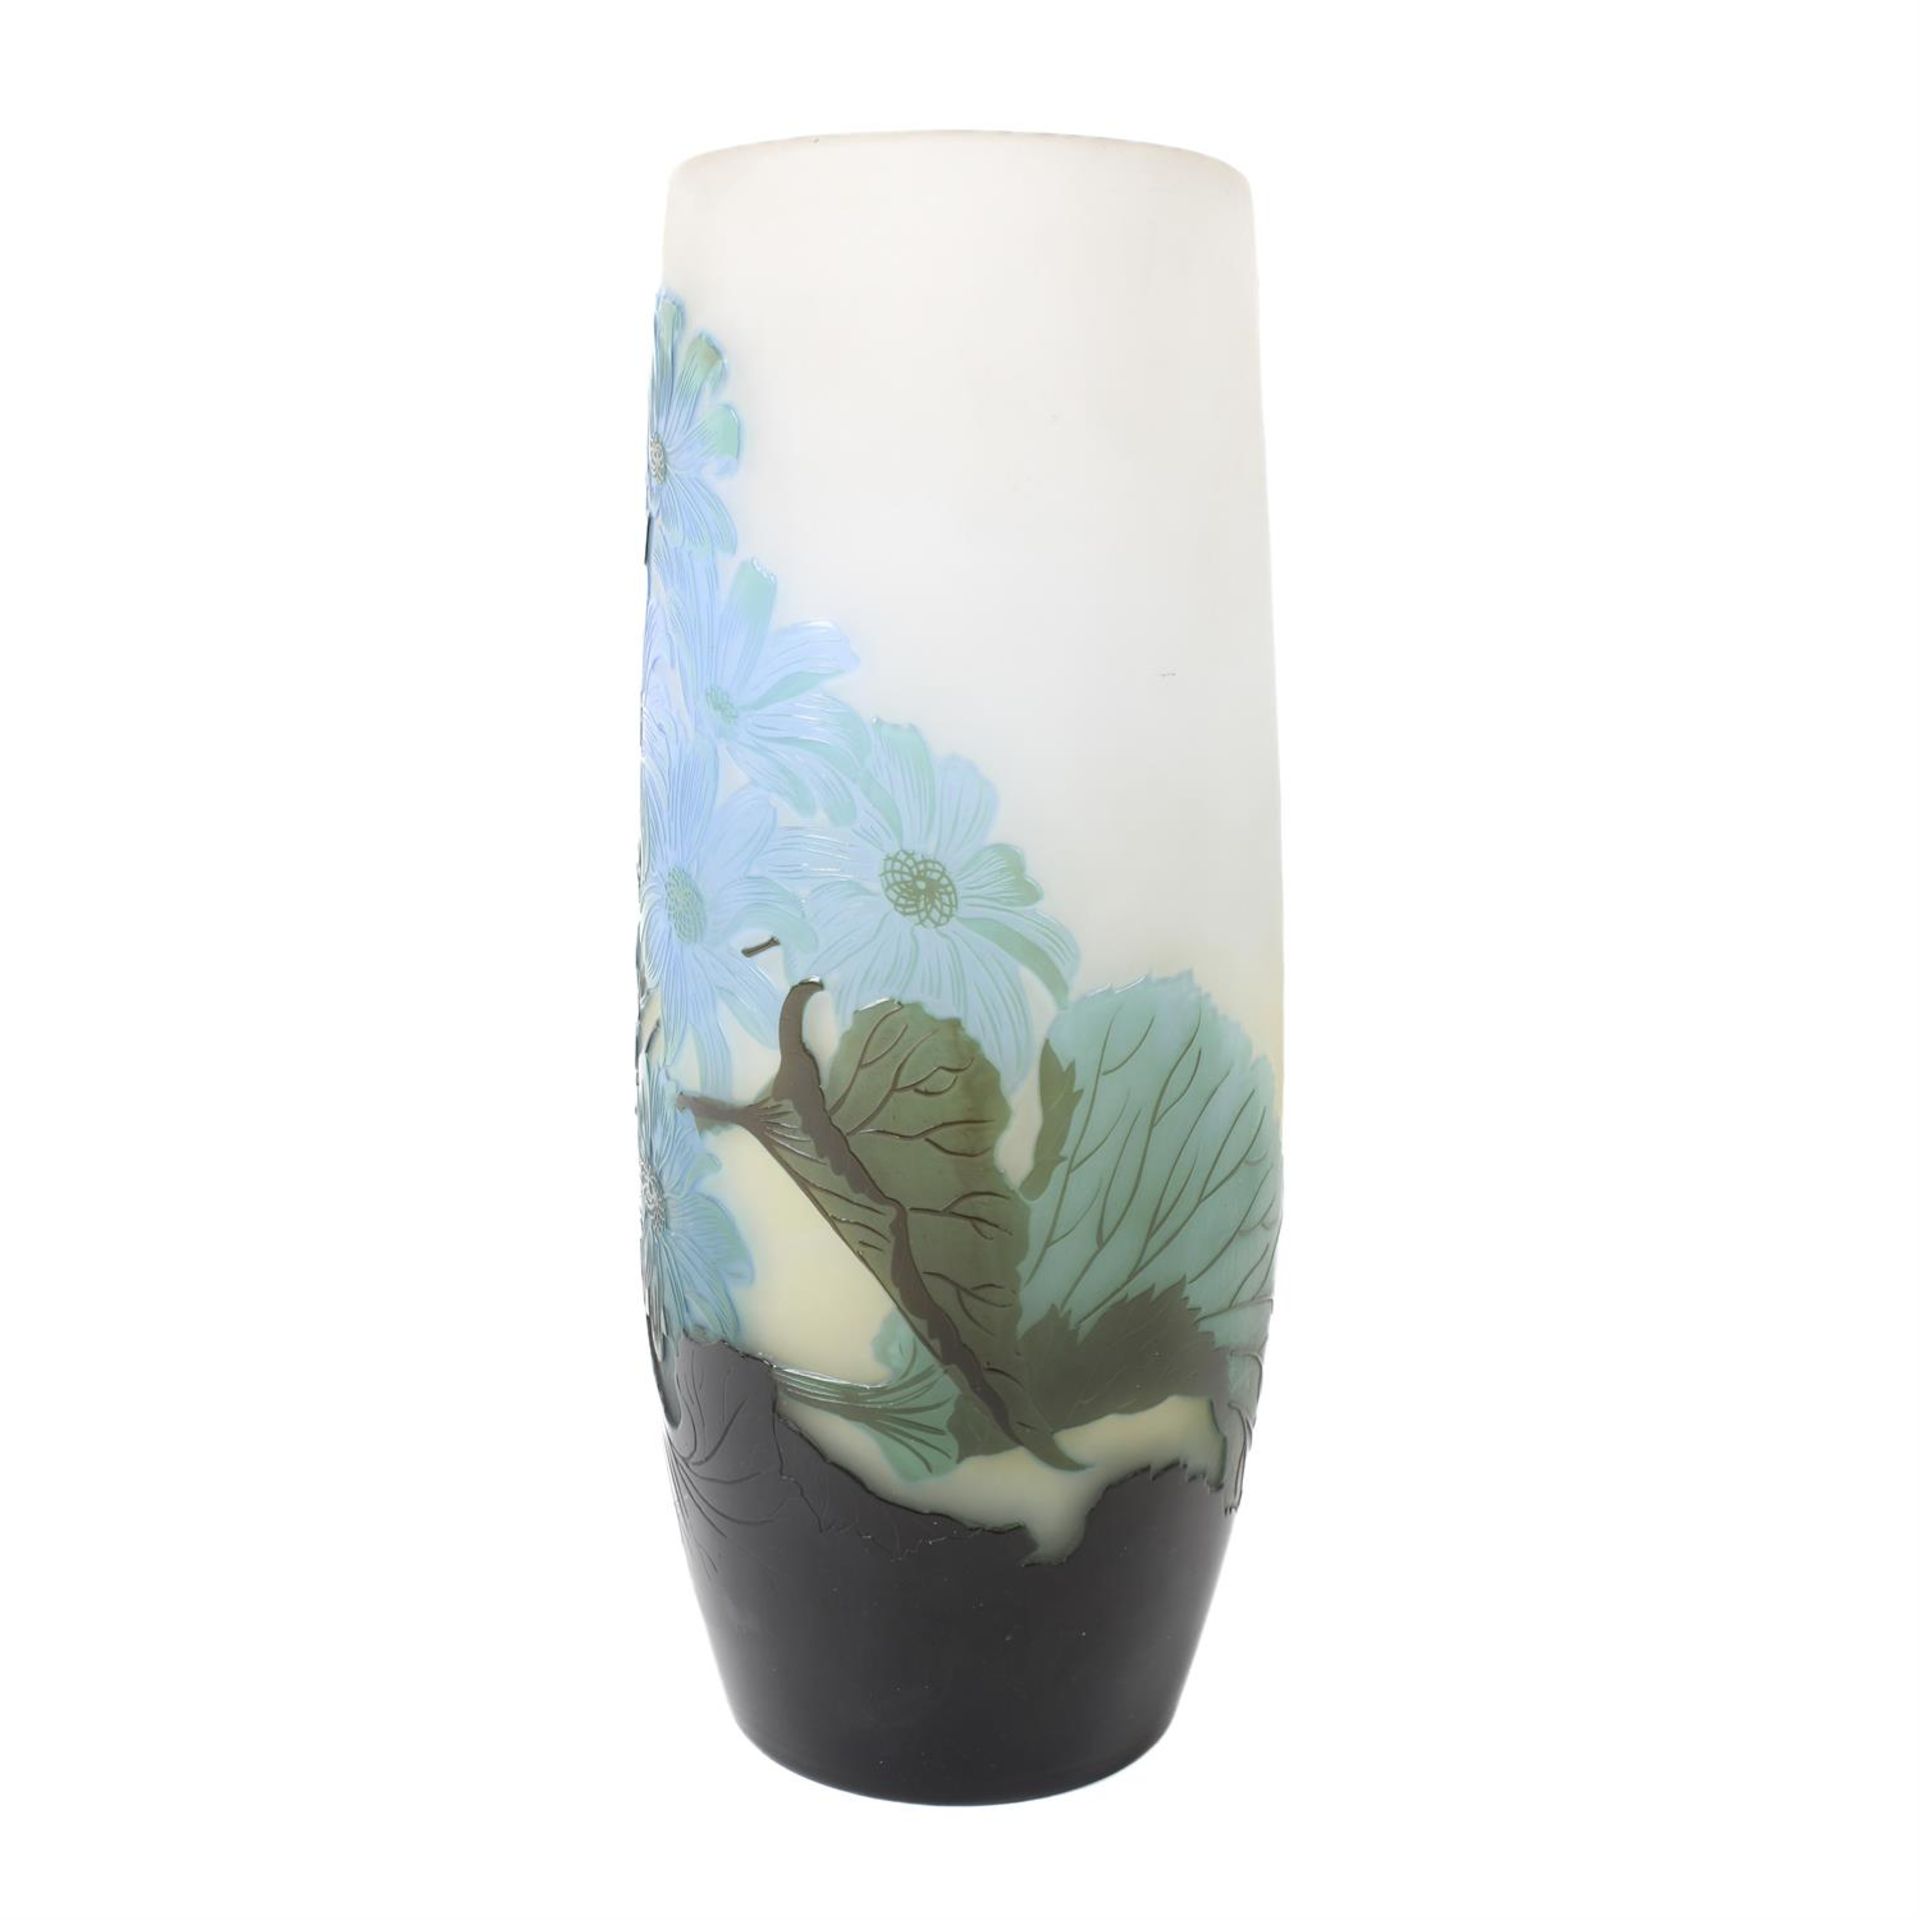 Emile Galle cameo glass vase with daisies - Image 4 of 8